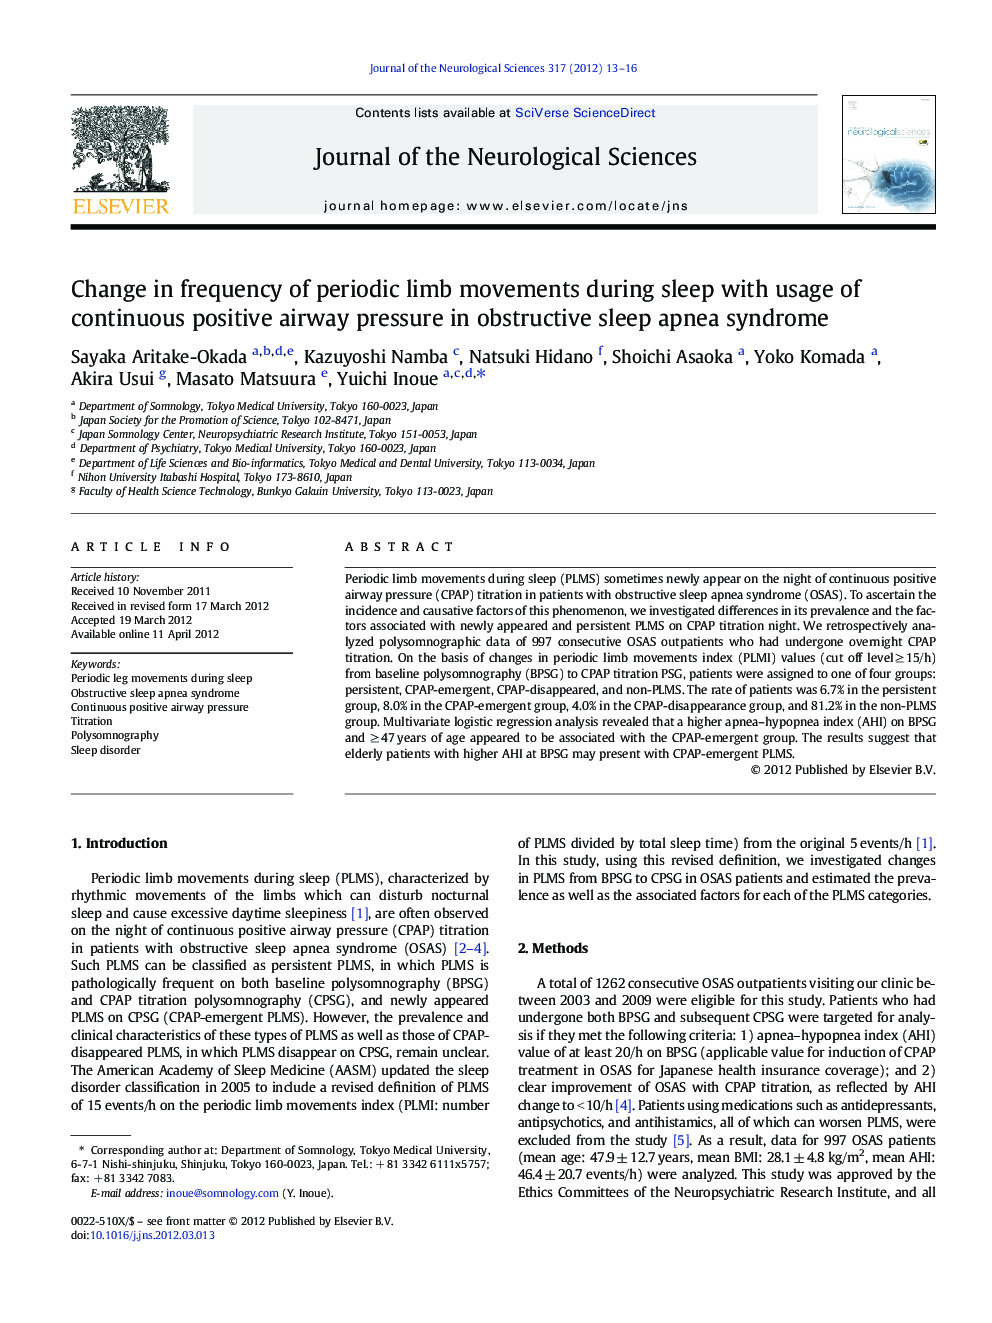 Change in frequency of periodic limb movements during sleep with usage of continuous positive airway pressure in obstructive sleep apnea syndrome